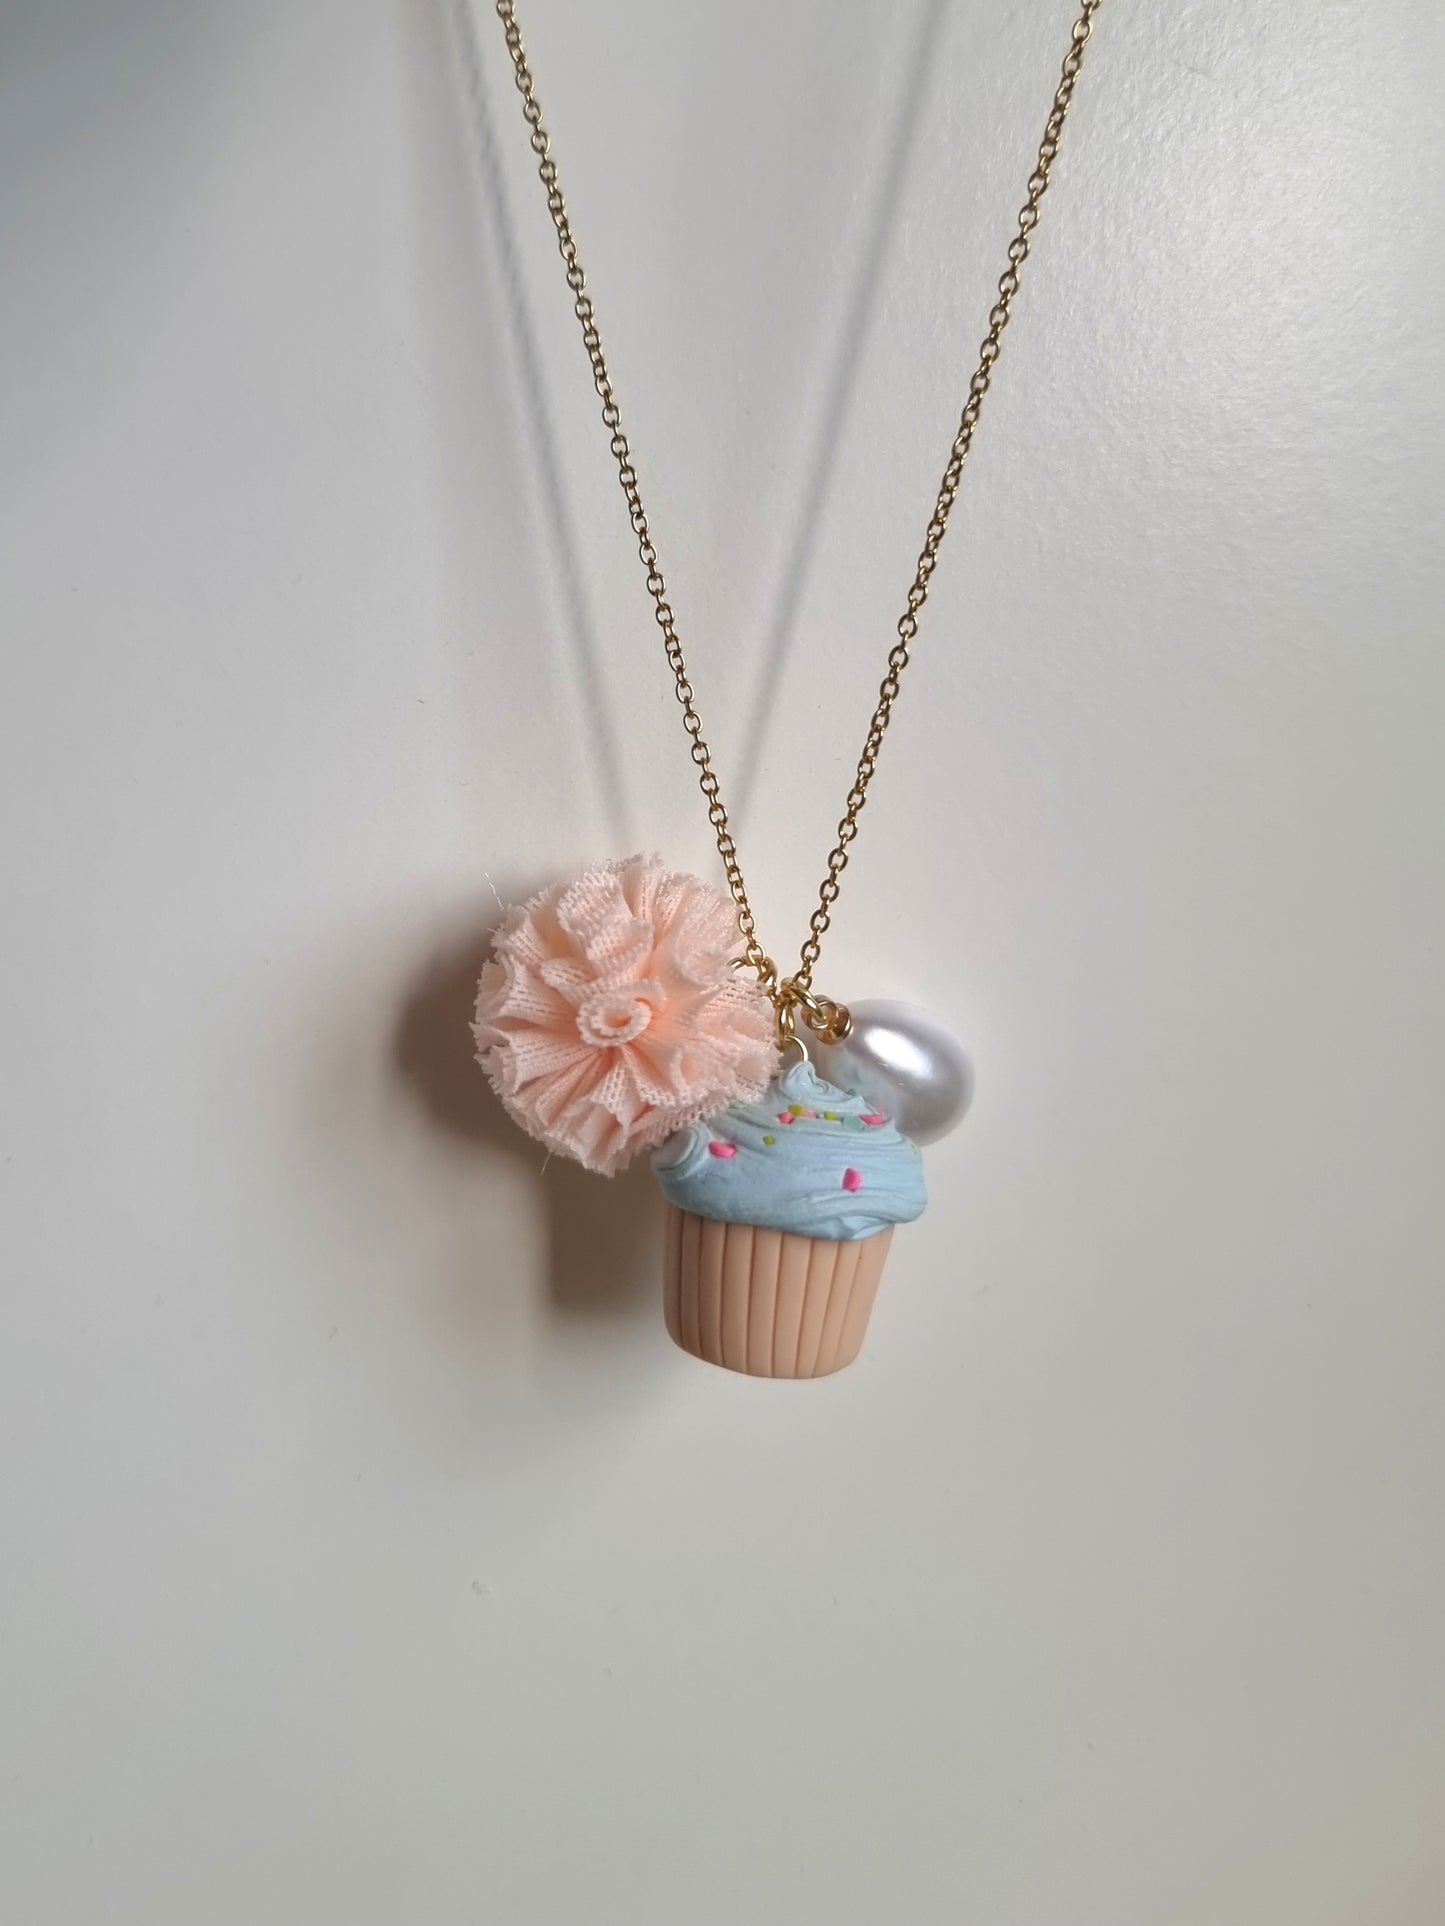 Meri! Blue and pink cupcake charm necklace